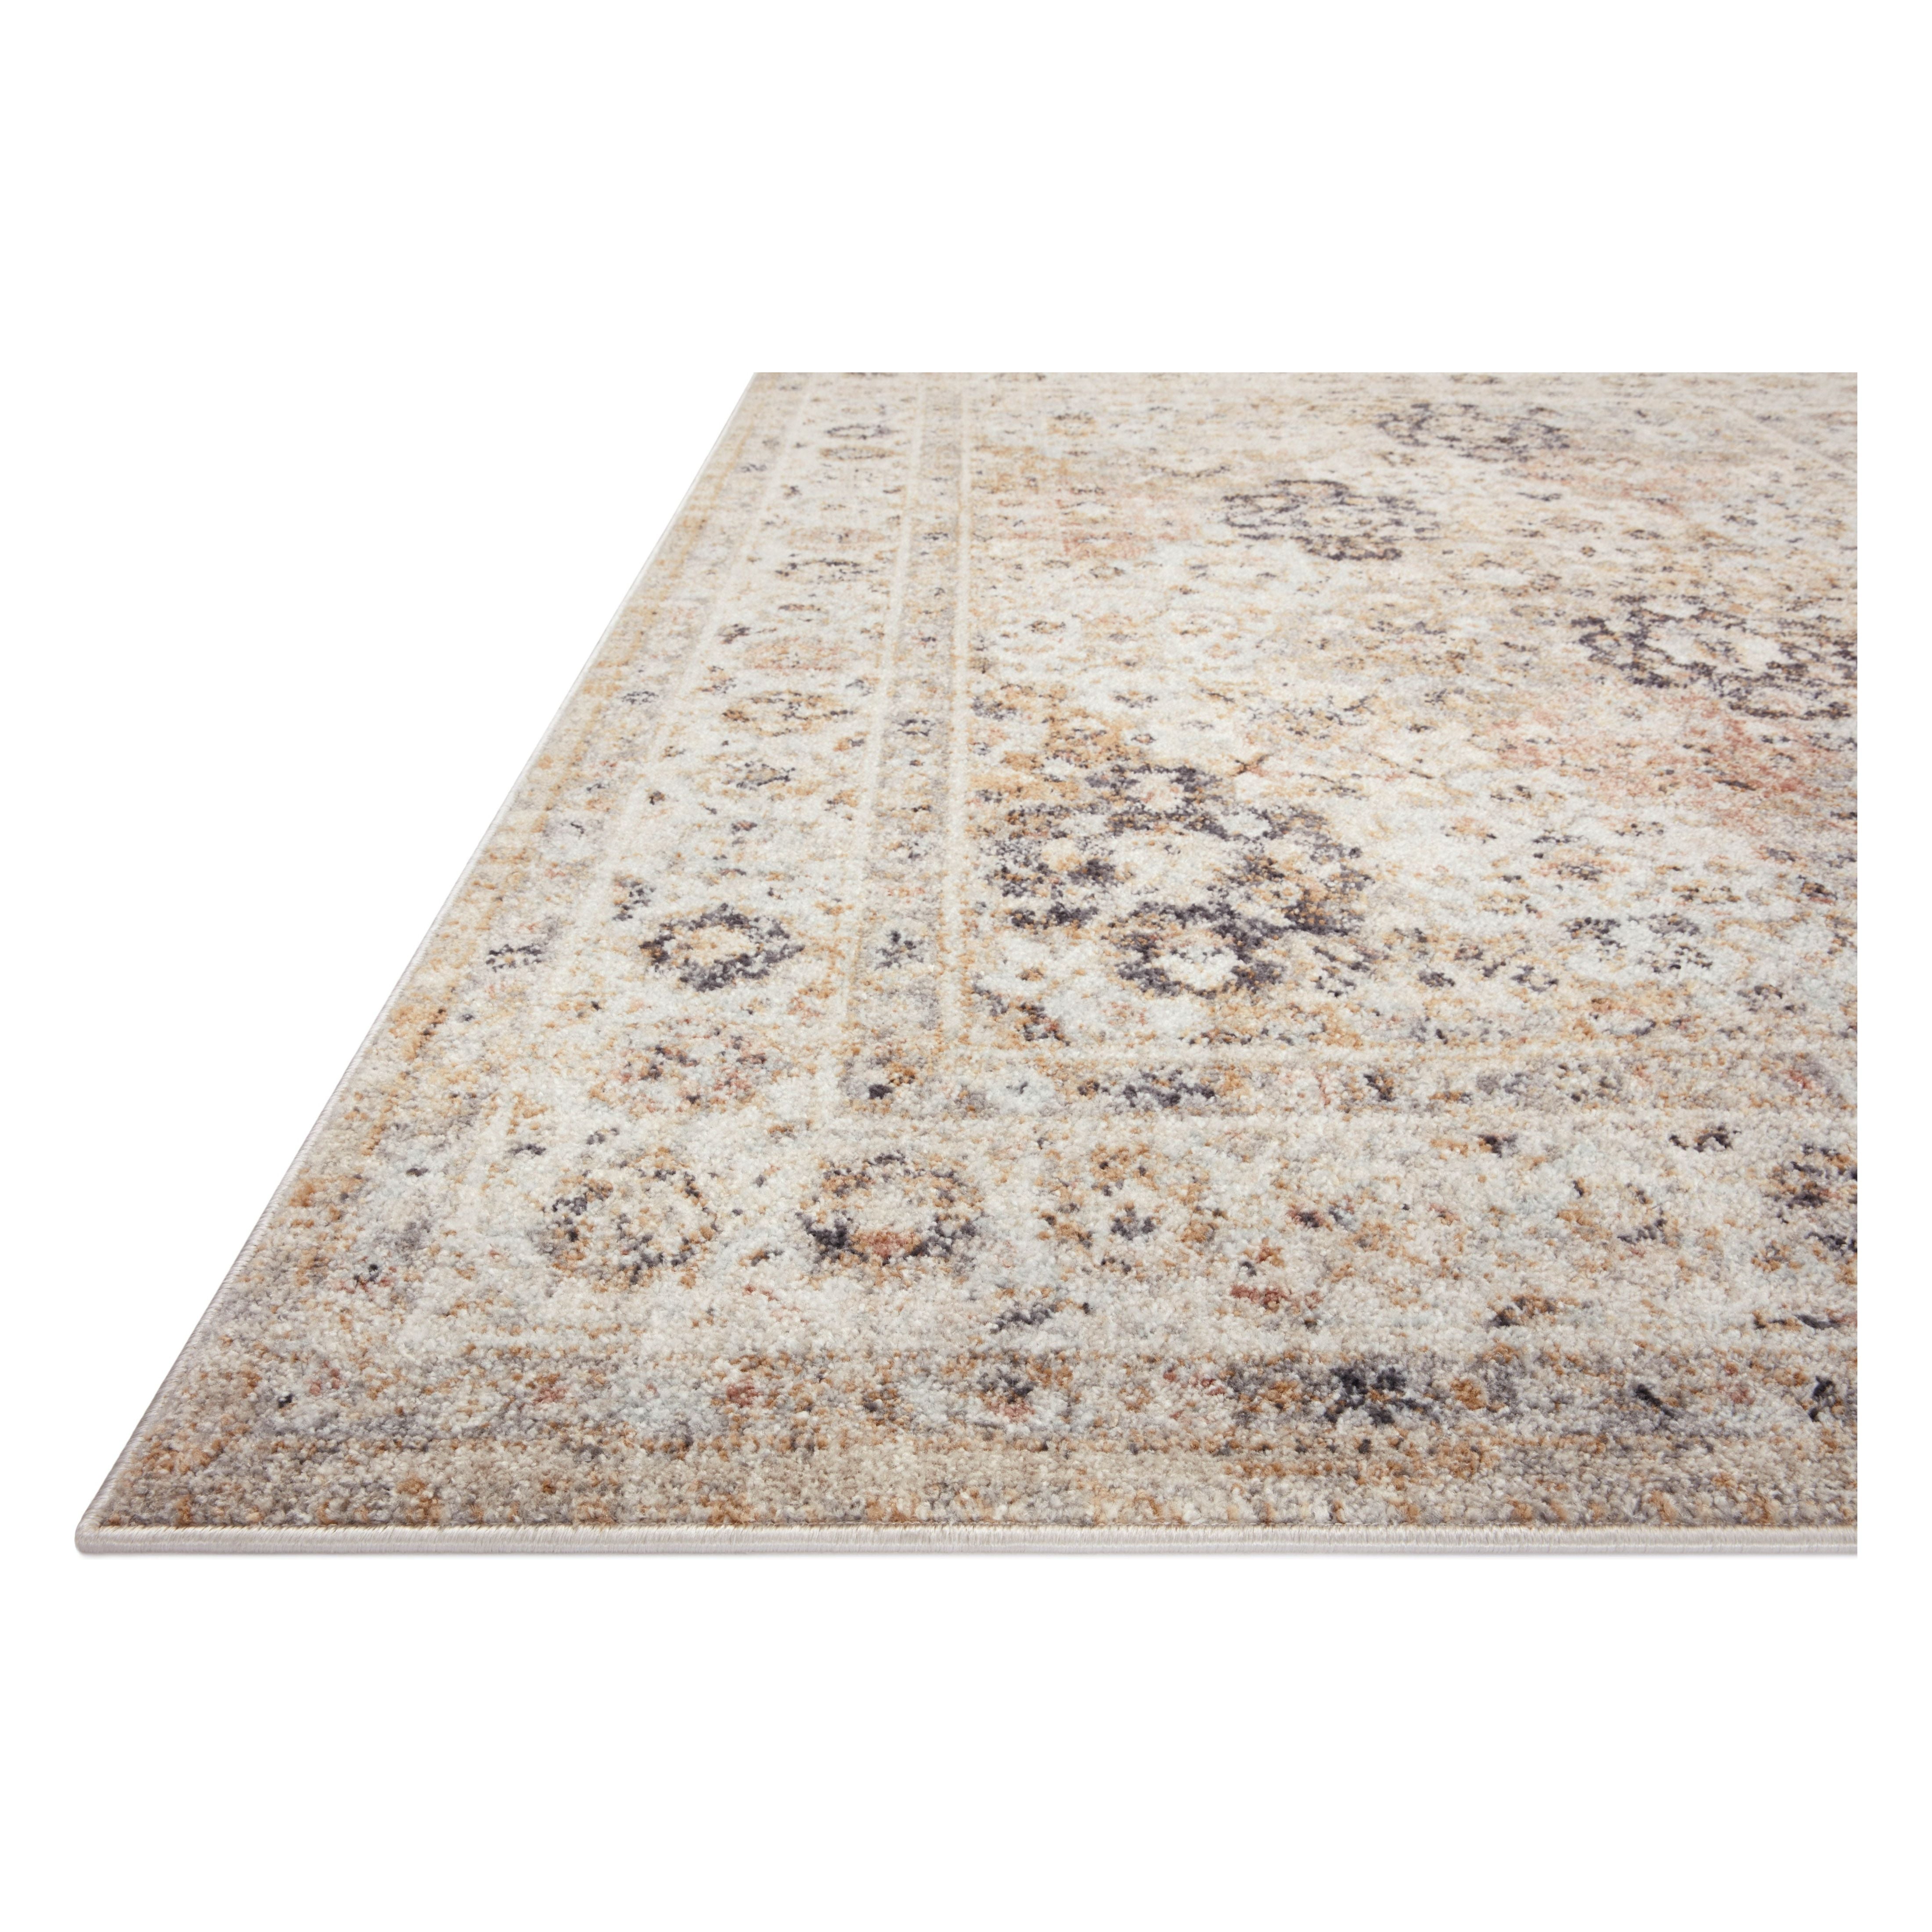 Inspired by antique Turkish Oushak carpets with large-scale motifs, the Monroe Beige / Multi Rug modernizes the traditional design in neutral palettes, many of which have black details that anchor the rug in the room. Monroe is power-loomed of 100% polypropylene for easy care and reliable durability. Amethyst Home provides interior design, new home construction design consulting, vintage area rugs, and lighting in the Newport Beach metro area.